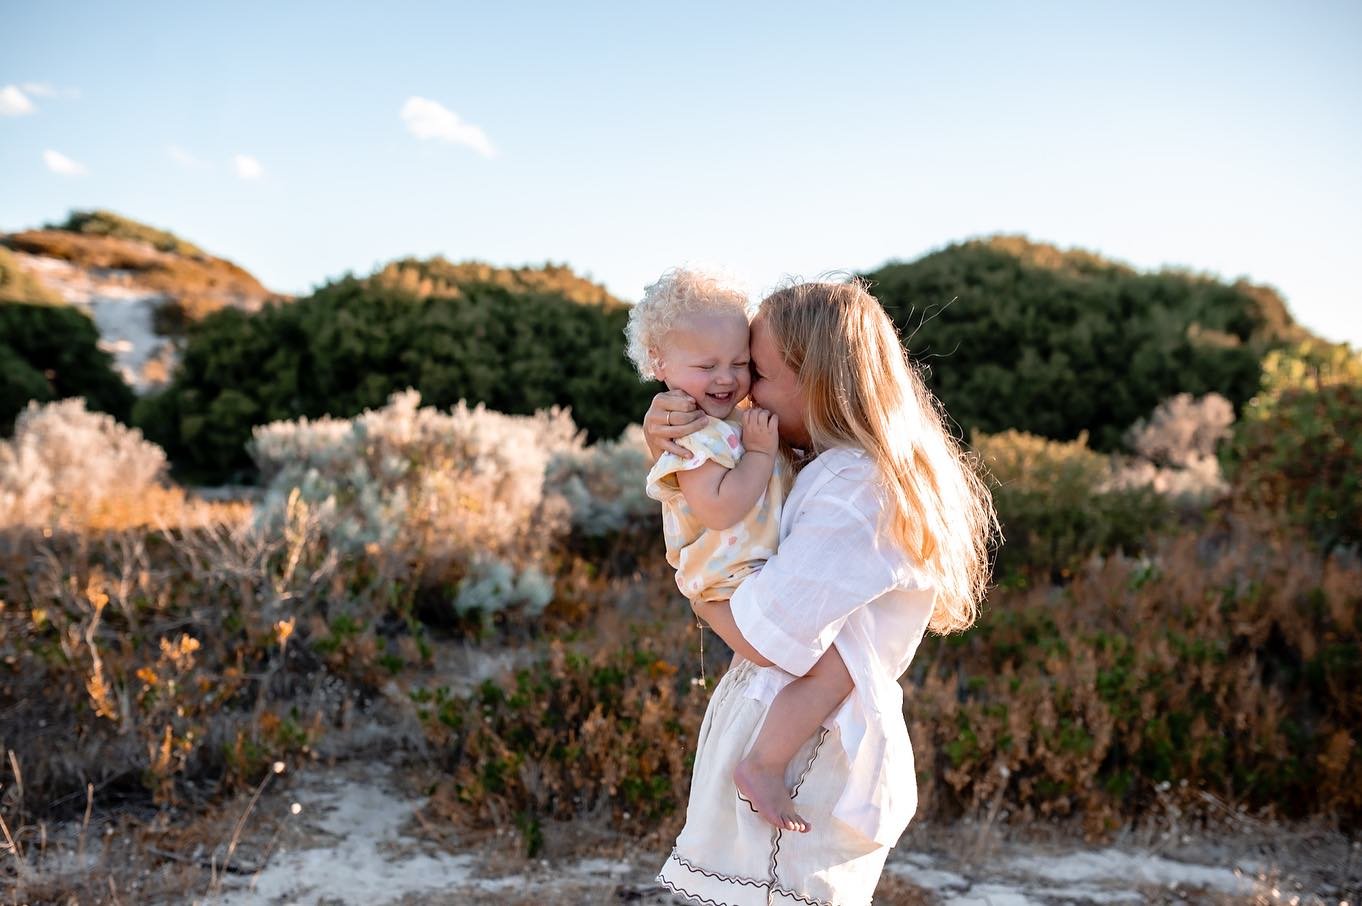 A fun filled, sun-soaked evening chilling with this lovely family #perthfamilyphotographer #perthmamas #perthmums #perthfamily #perthfamilyphotography #perthfamilyportraits #perthphotographer